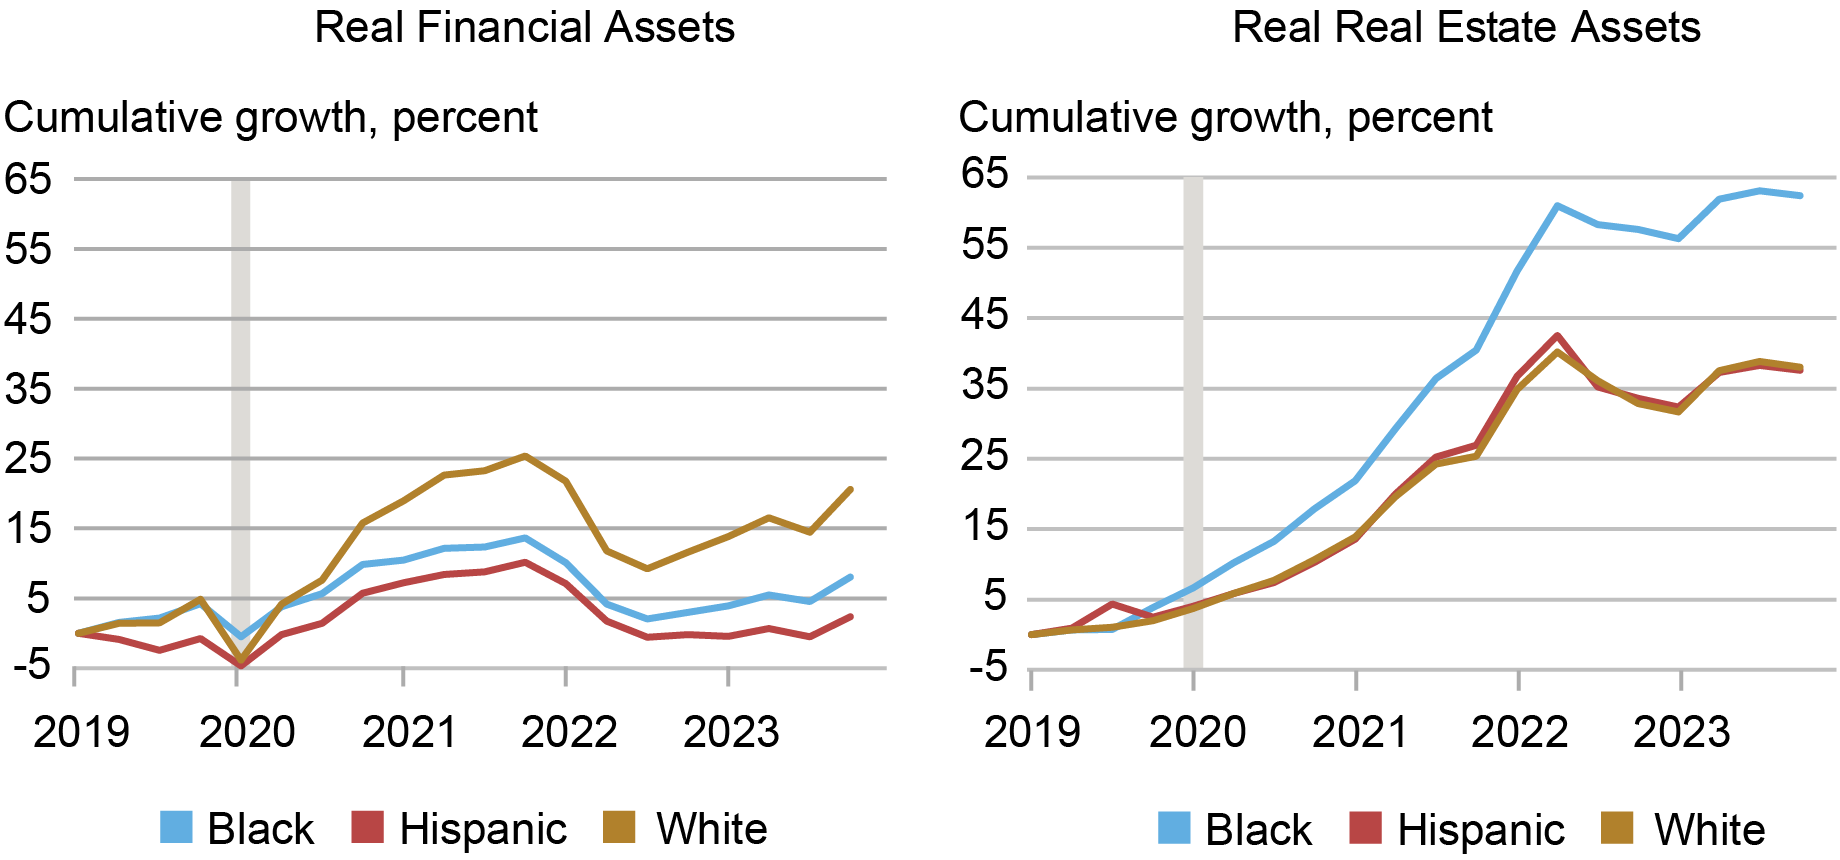 Alt=”two line charts: left, tracking financial asset growth by percentage from 2019 through 2023 for Black (blue), Hispanic (red), and white (gold) households; right, tracking real estate asset growth by percentage from 2019 through 2023 for Black (blue), Hispanic (red), and white (gold) households” 